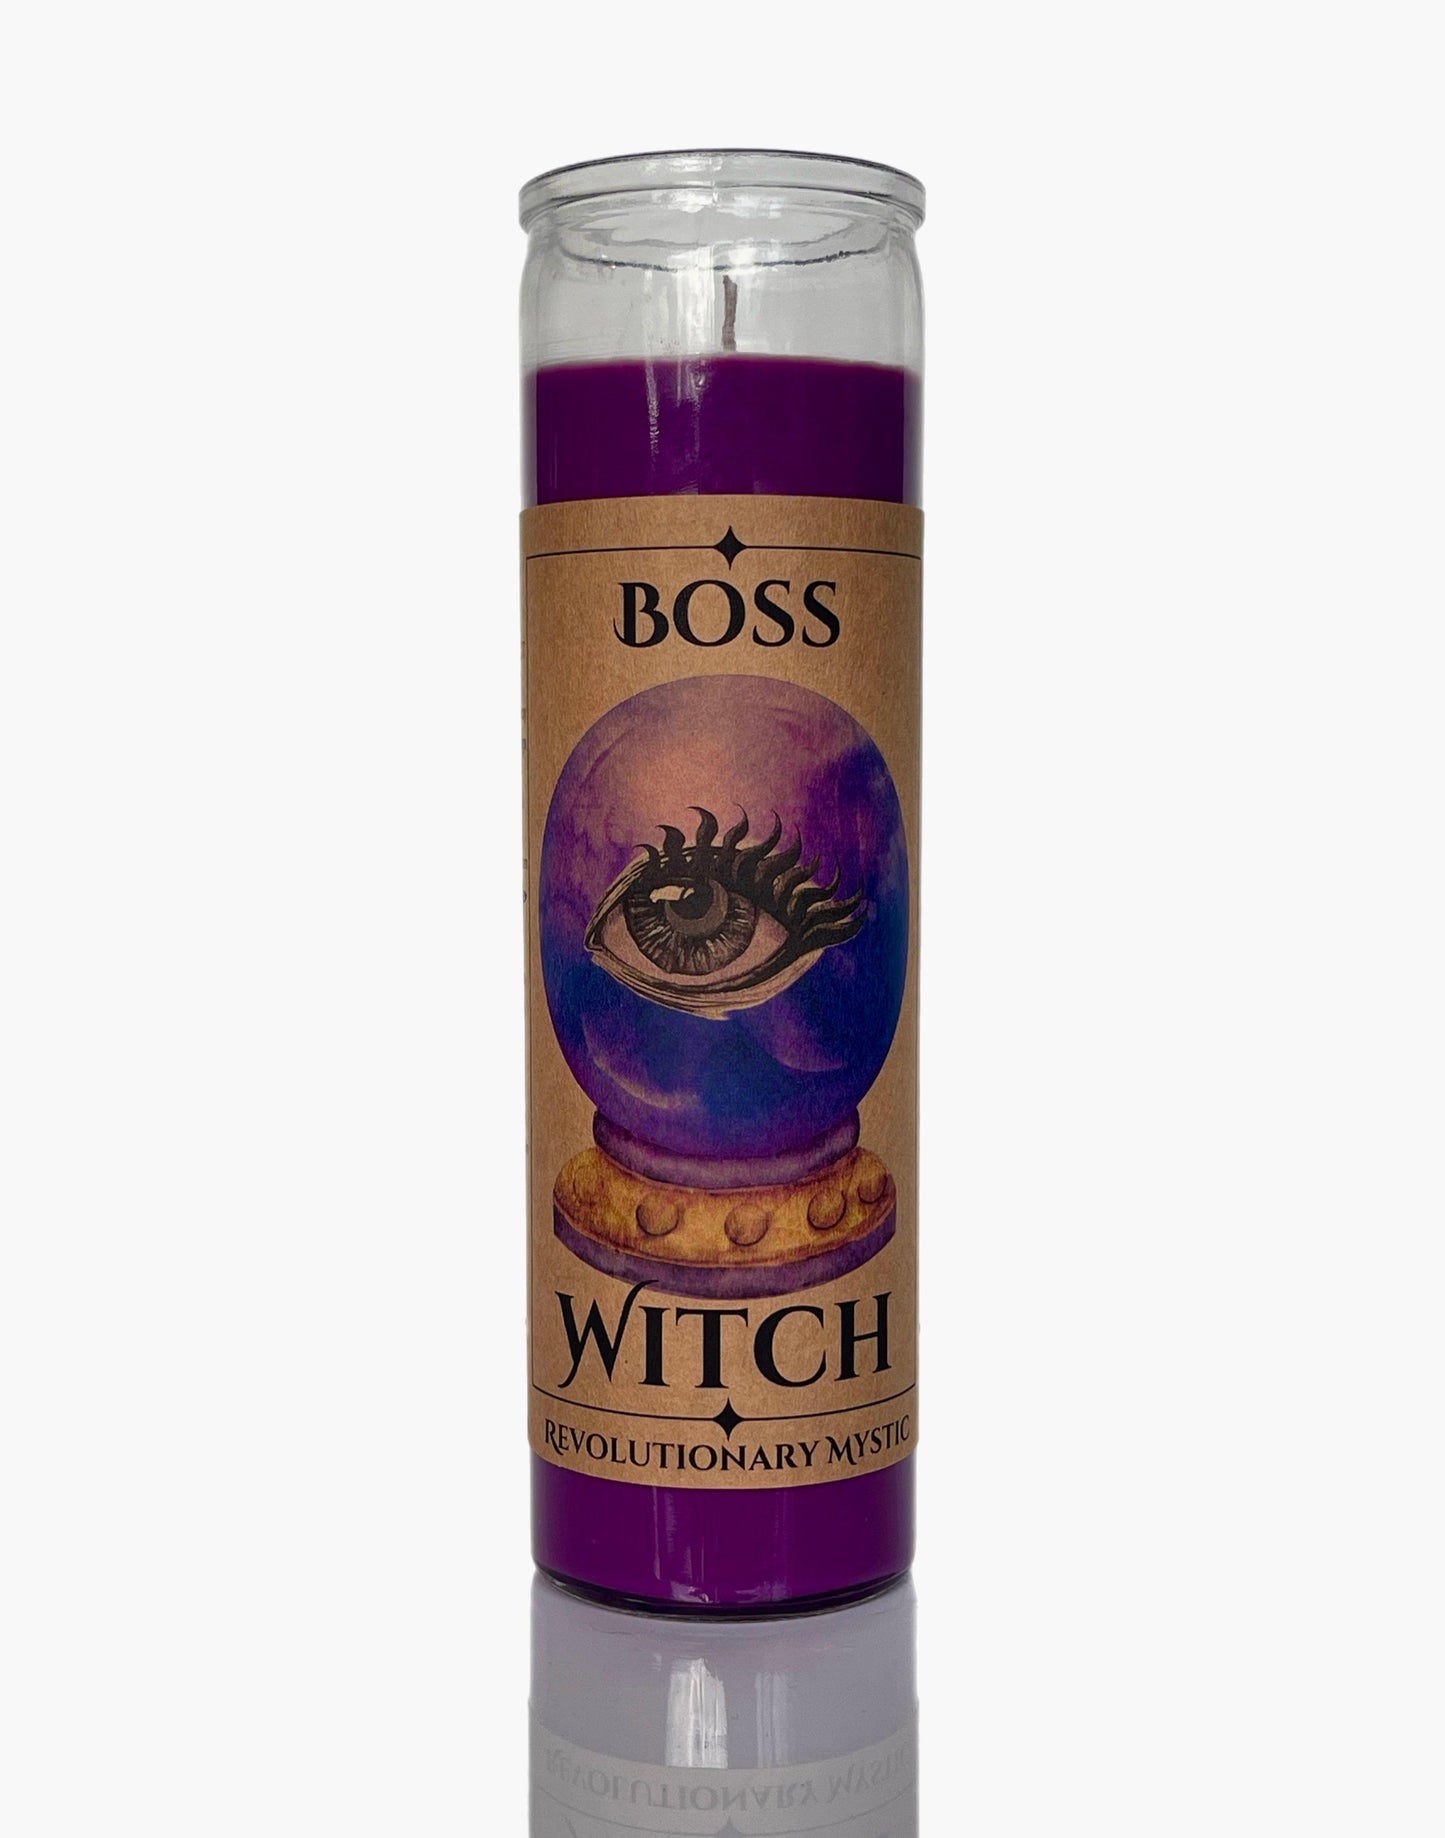 Boss Witch Candle - Revolutionary Mystic